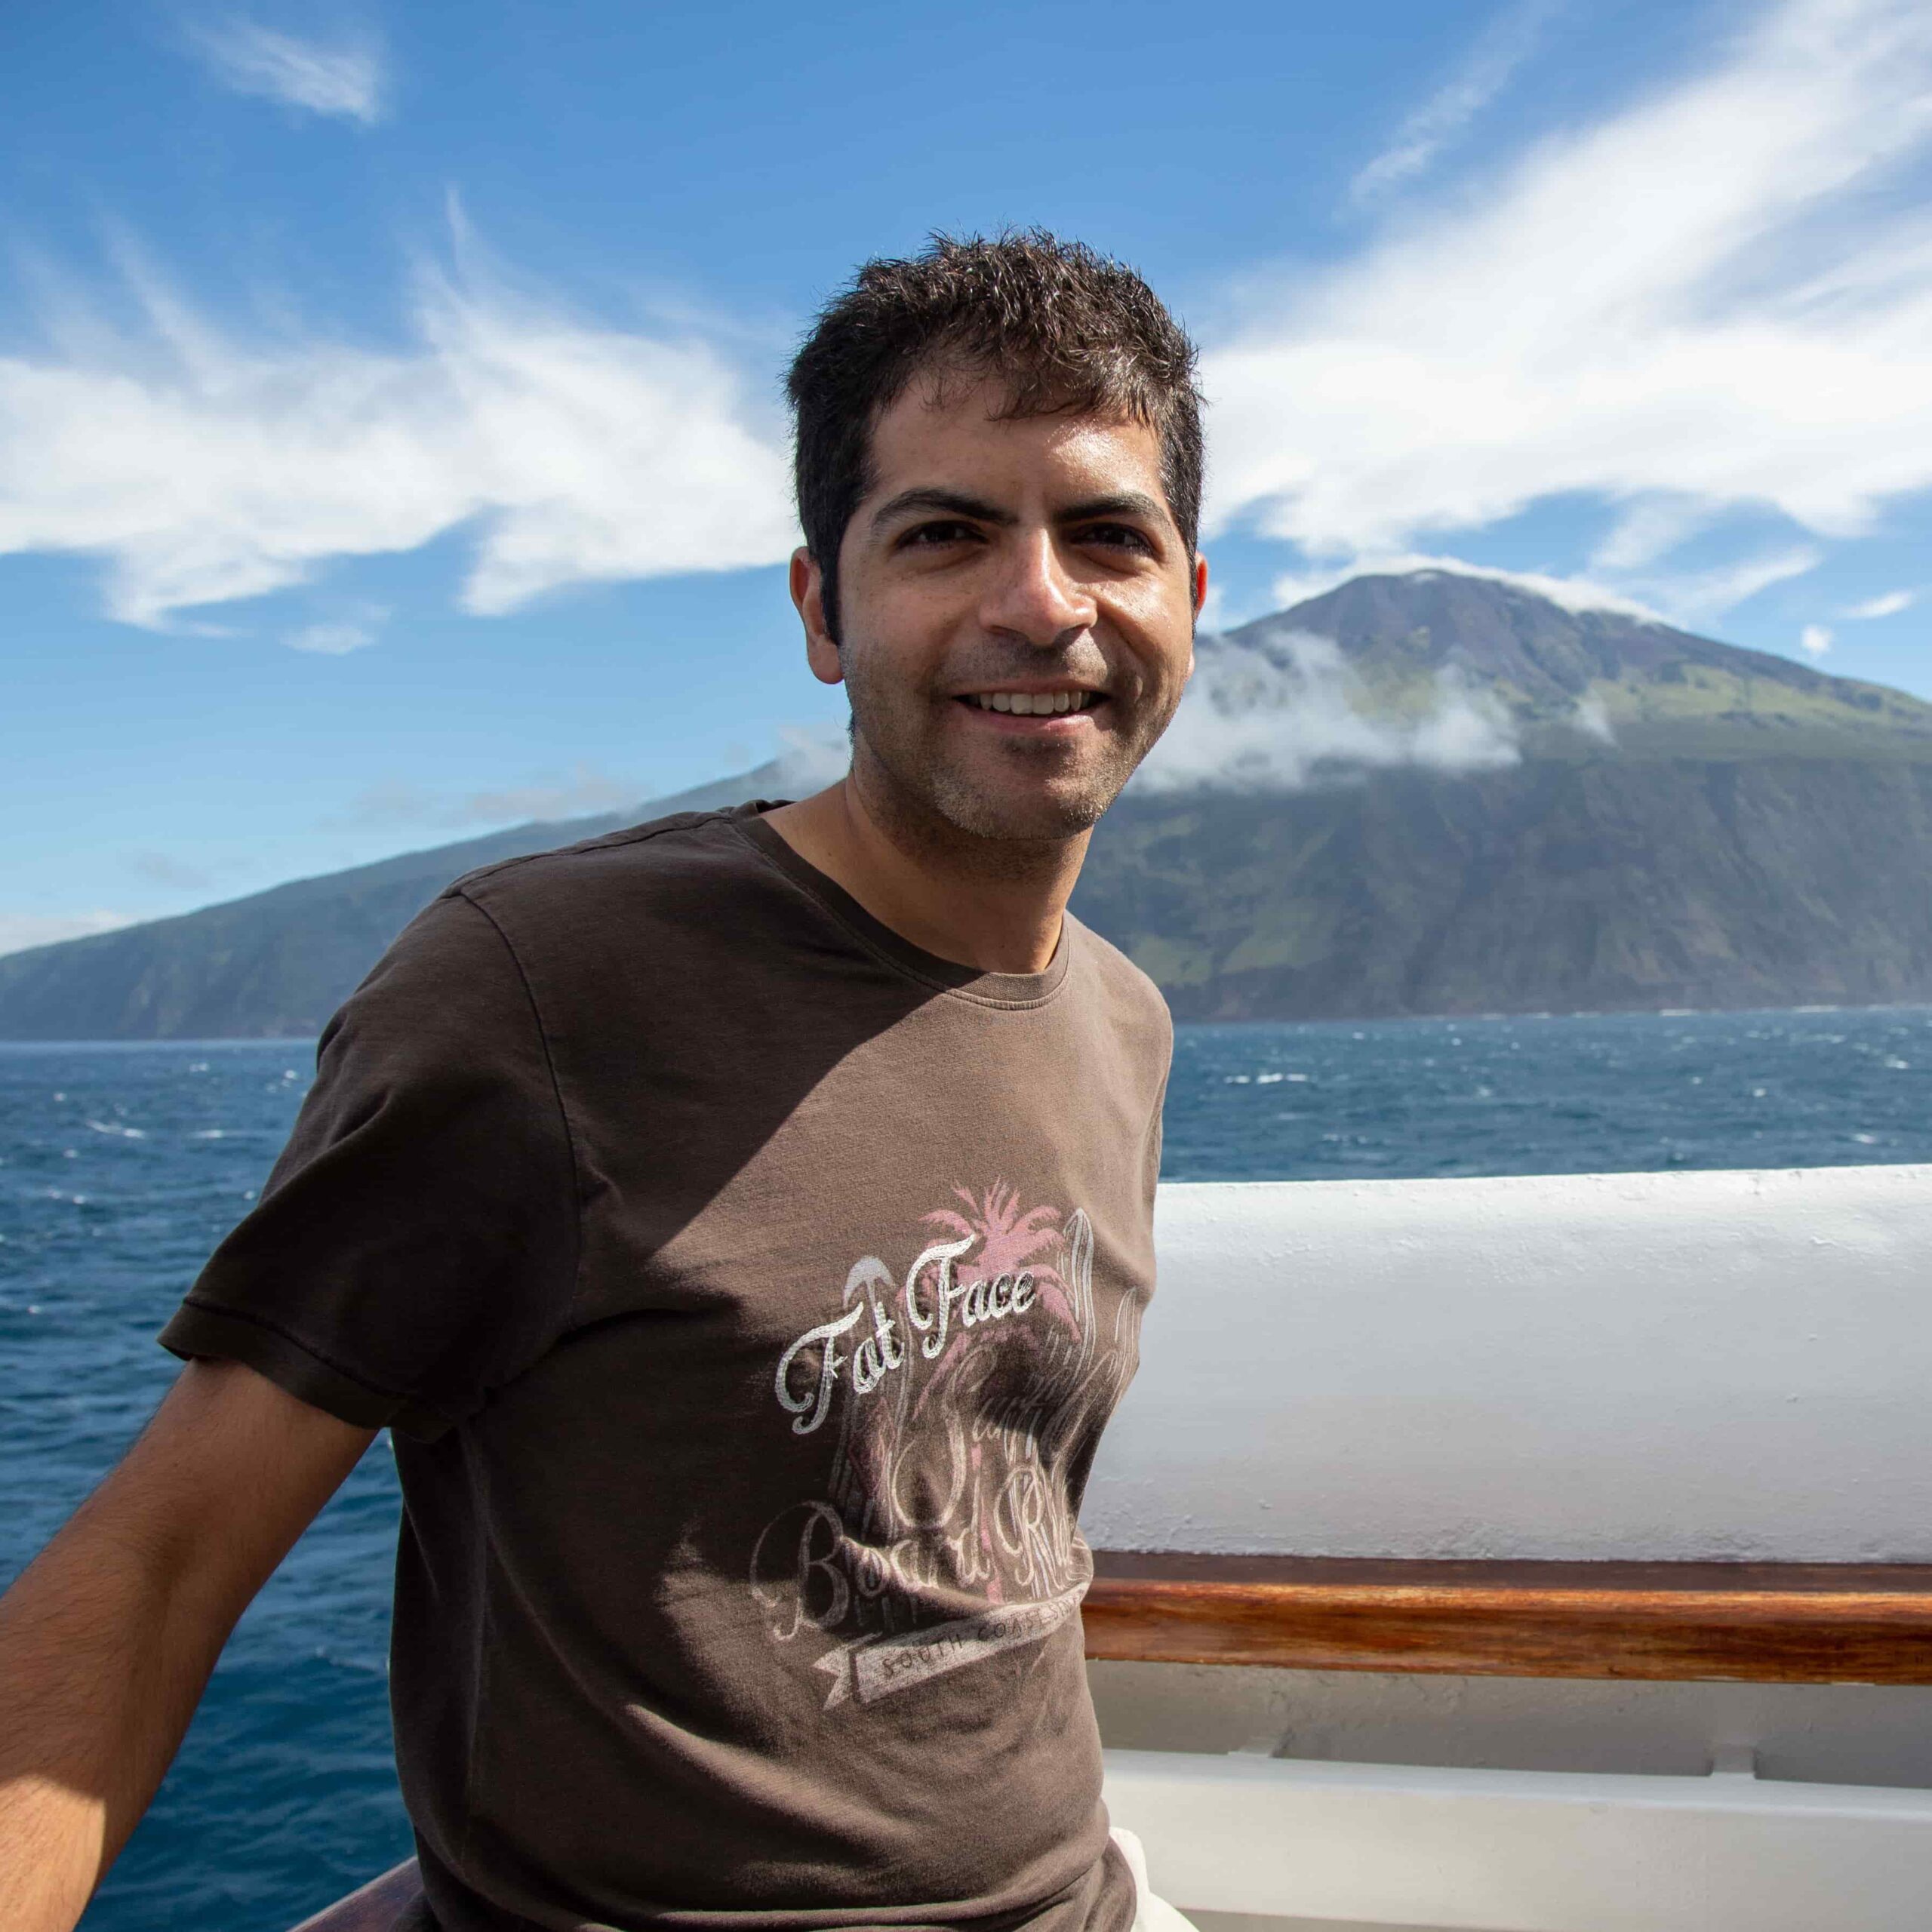 Aniket Sardana standing on a boat with an island in the background